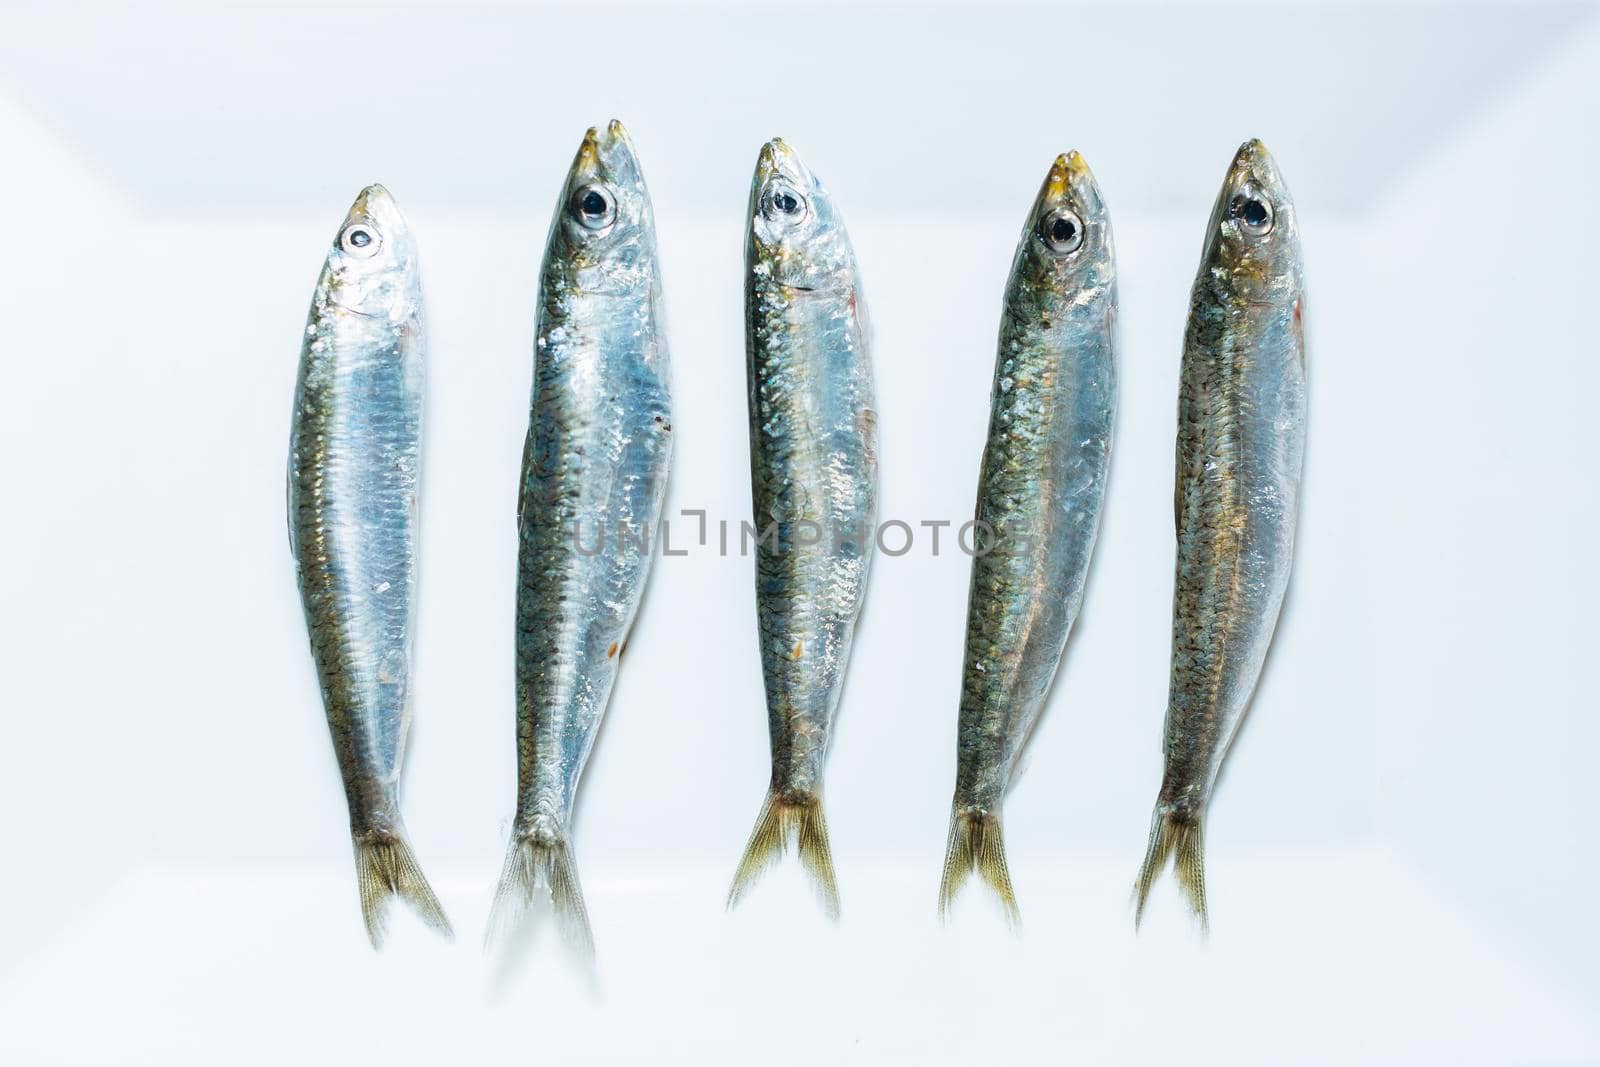 Venetian pilchard (Sardina Pilchardus), tipically fried or used for Sardines in Saor, a recipe with onions cooked in vinegar, raisins and pine nuts